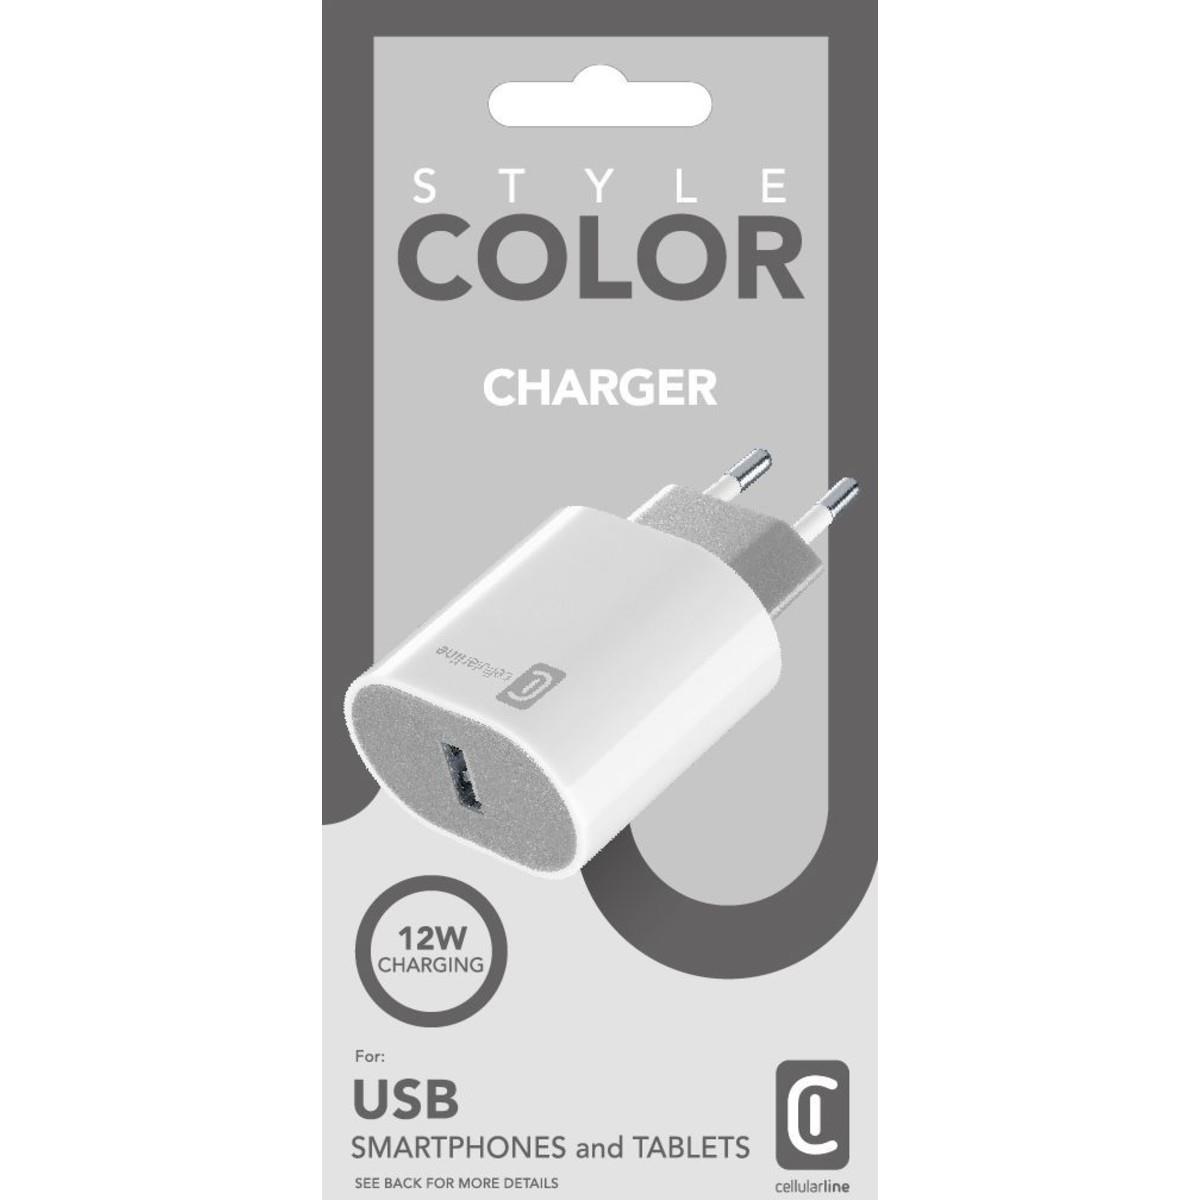 Reiselader STYLE COLOR 12W USB Type-A